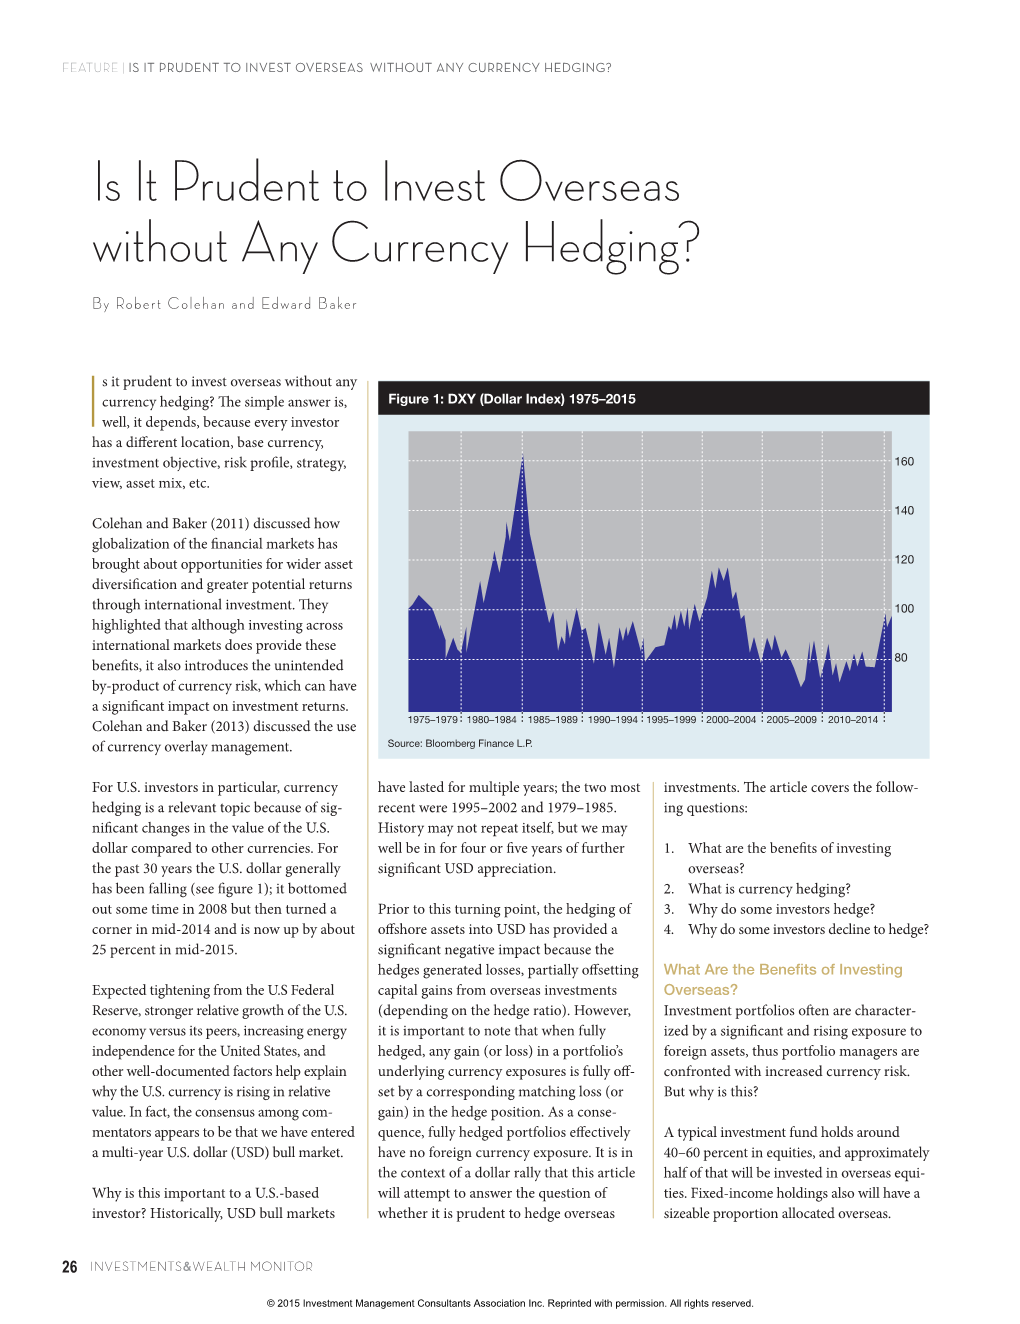 Is It Prudent to Invest Overseas Without Any Currency Hedging?